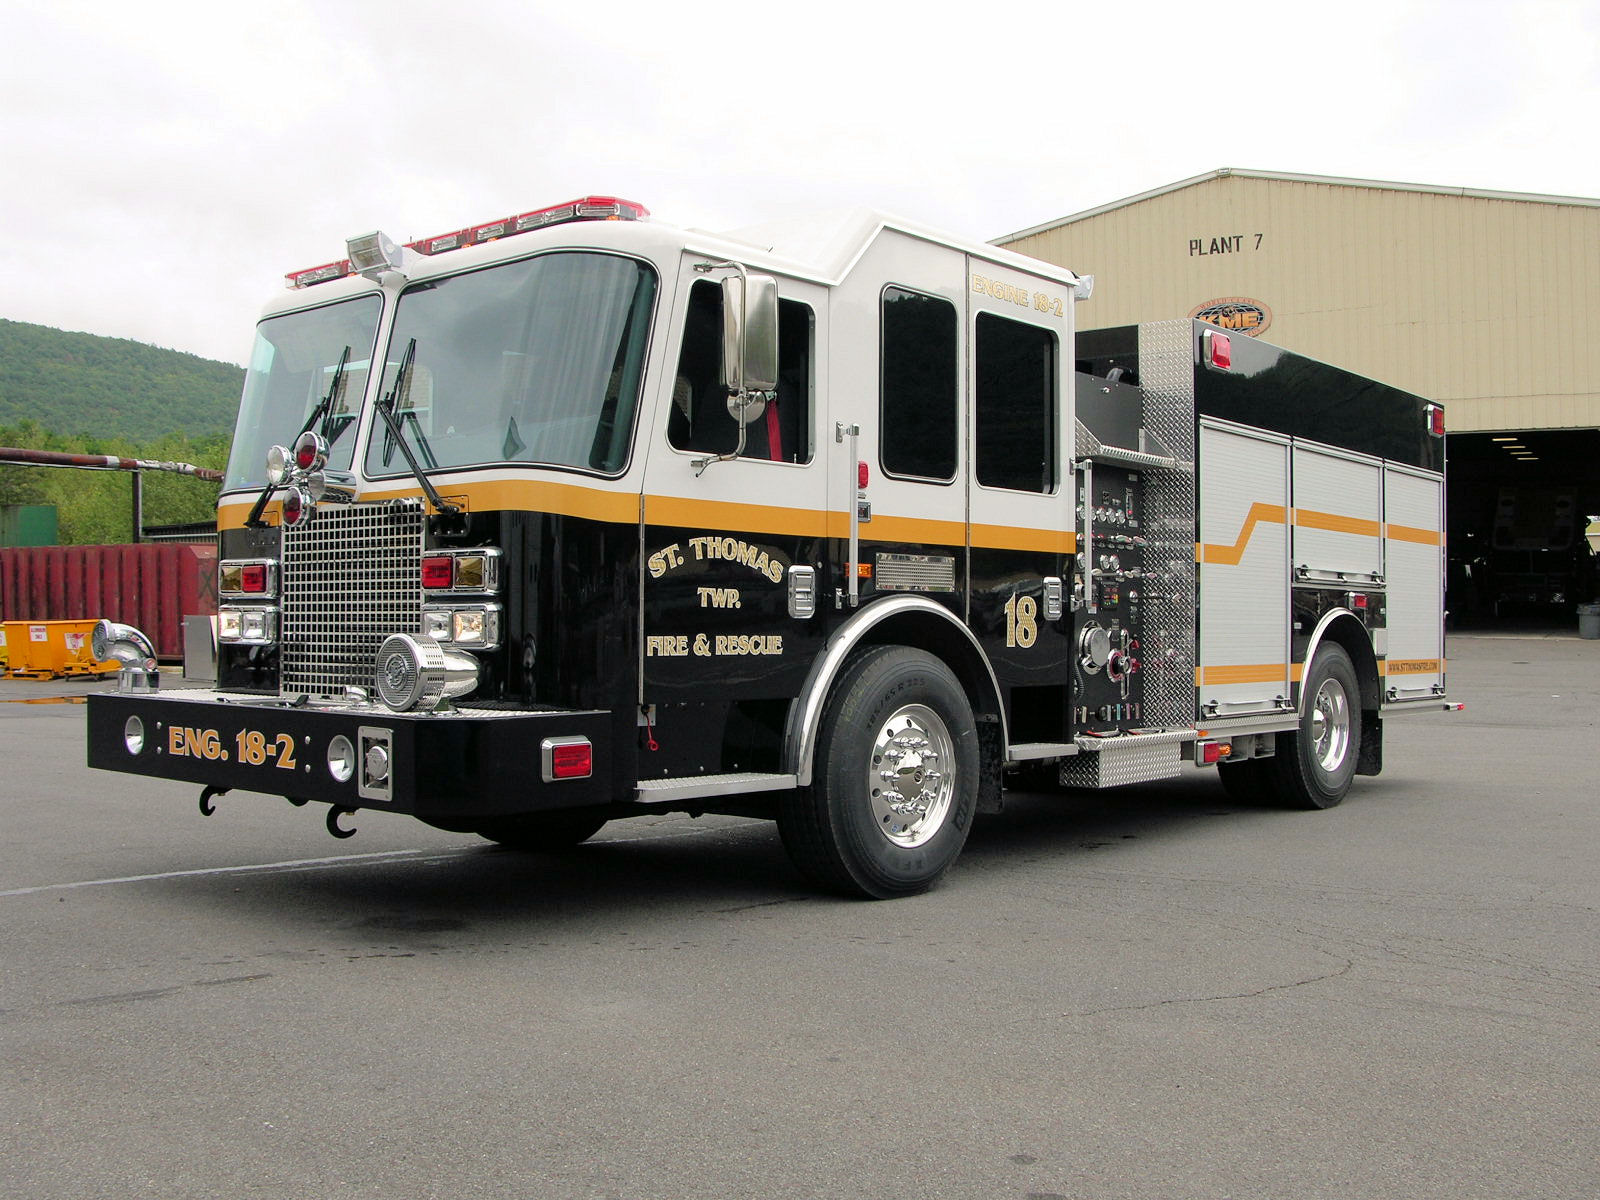 st-thomas-twp-fire-rescue